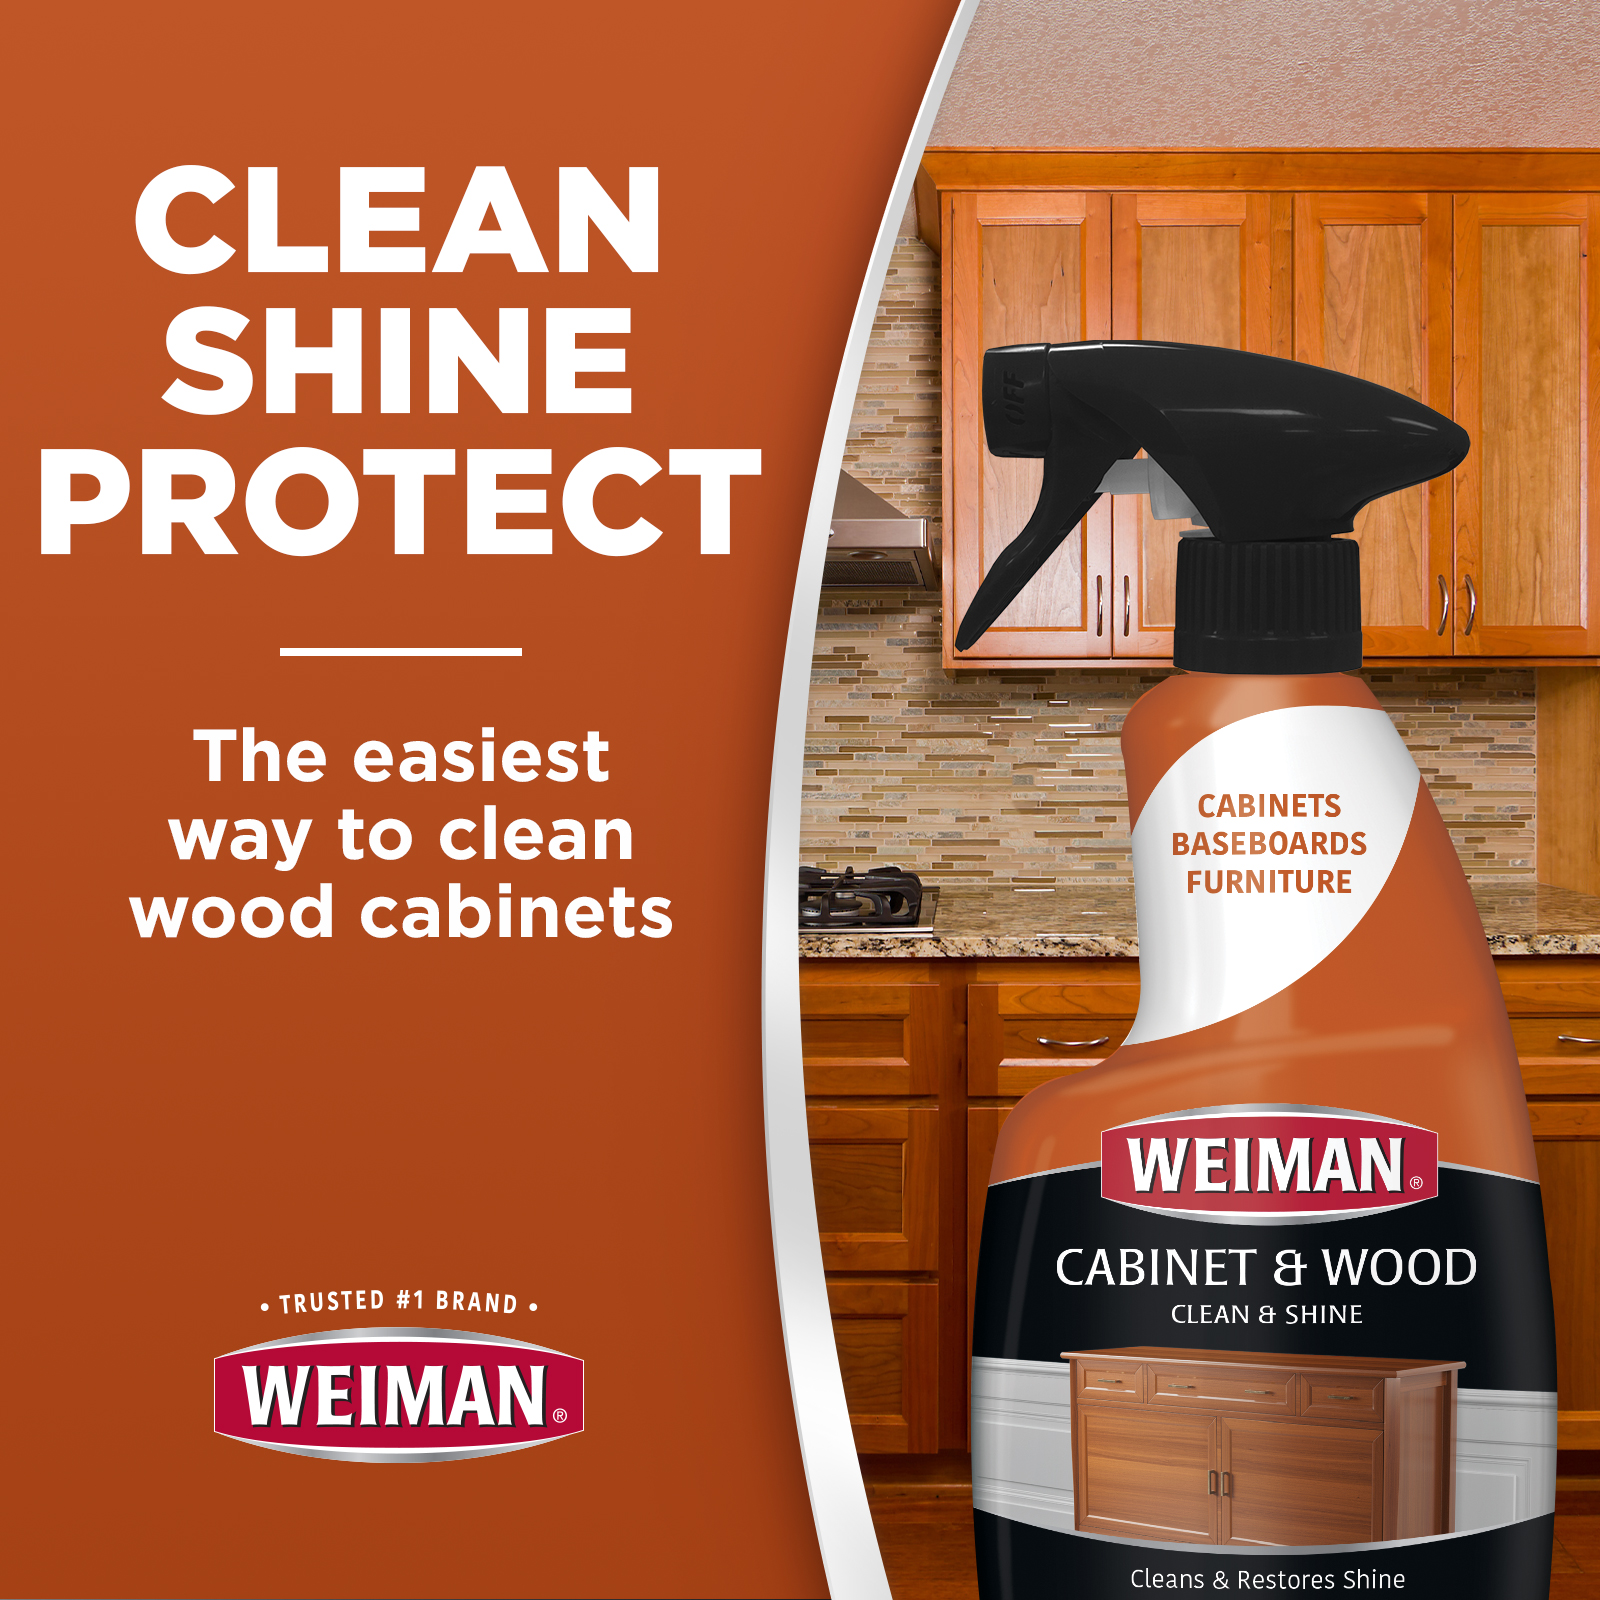 Weiman Liquid Wood Cleaner & Polish, Almond Scent, 16 Fluid Ounce, 2 Count w/ Microfiber Towel - image 3 of 8